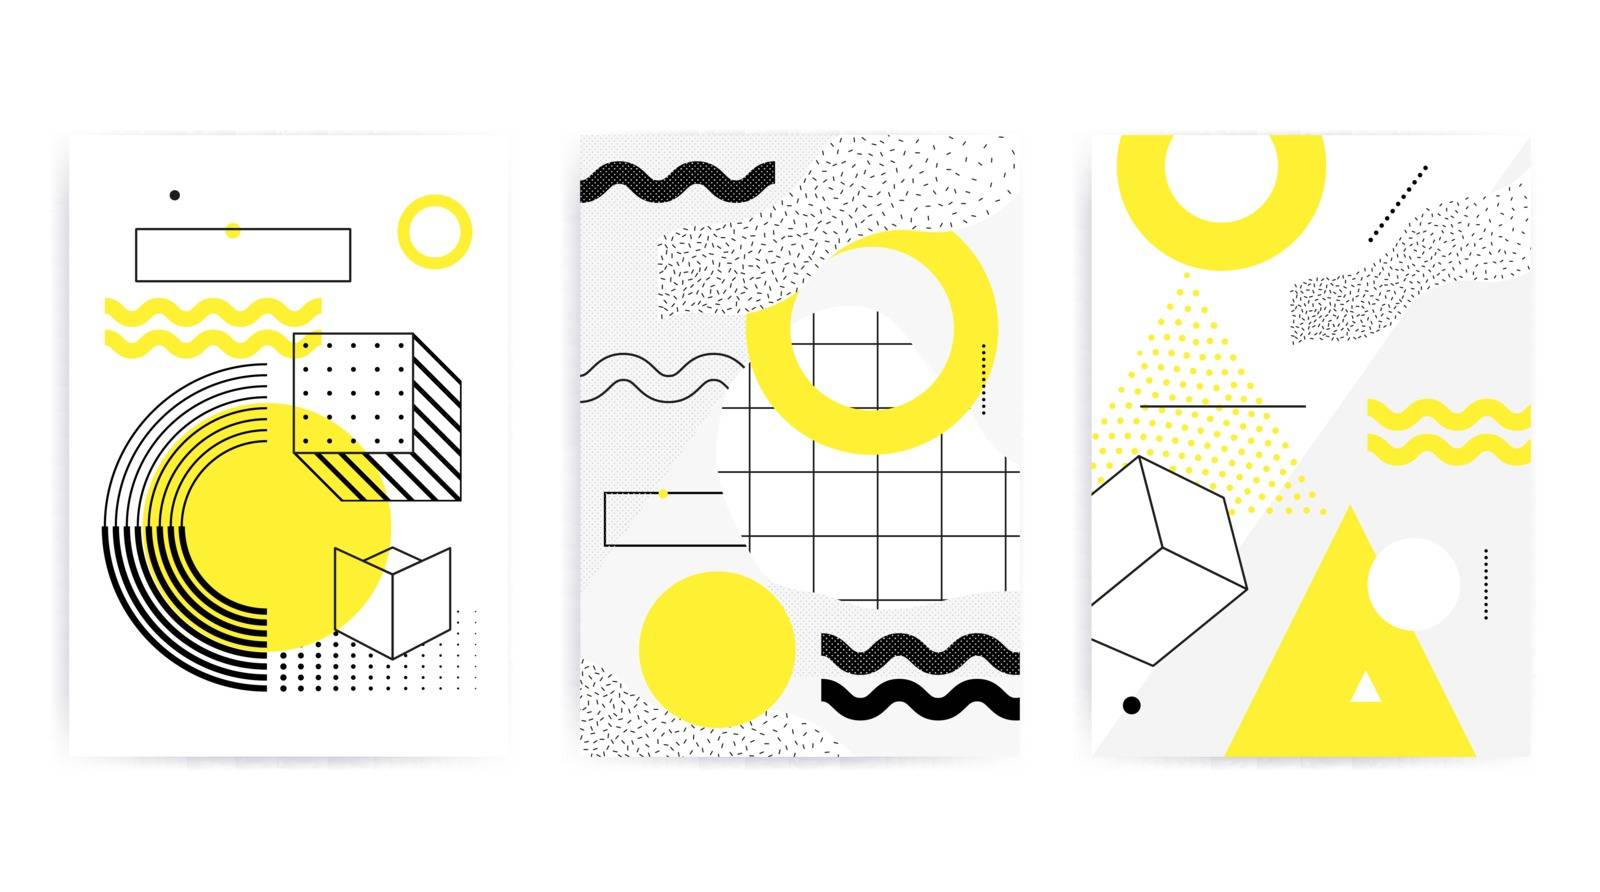 Universal posters collection with bright bold geometric yellow elements, chaotic composition in restrained sustained tempered style. Easy editable clipping mask. Magazine, leaflet, ad, typography, print